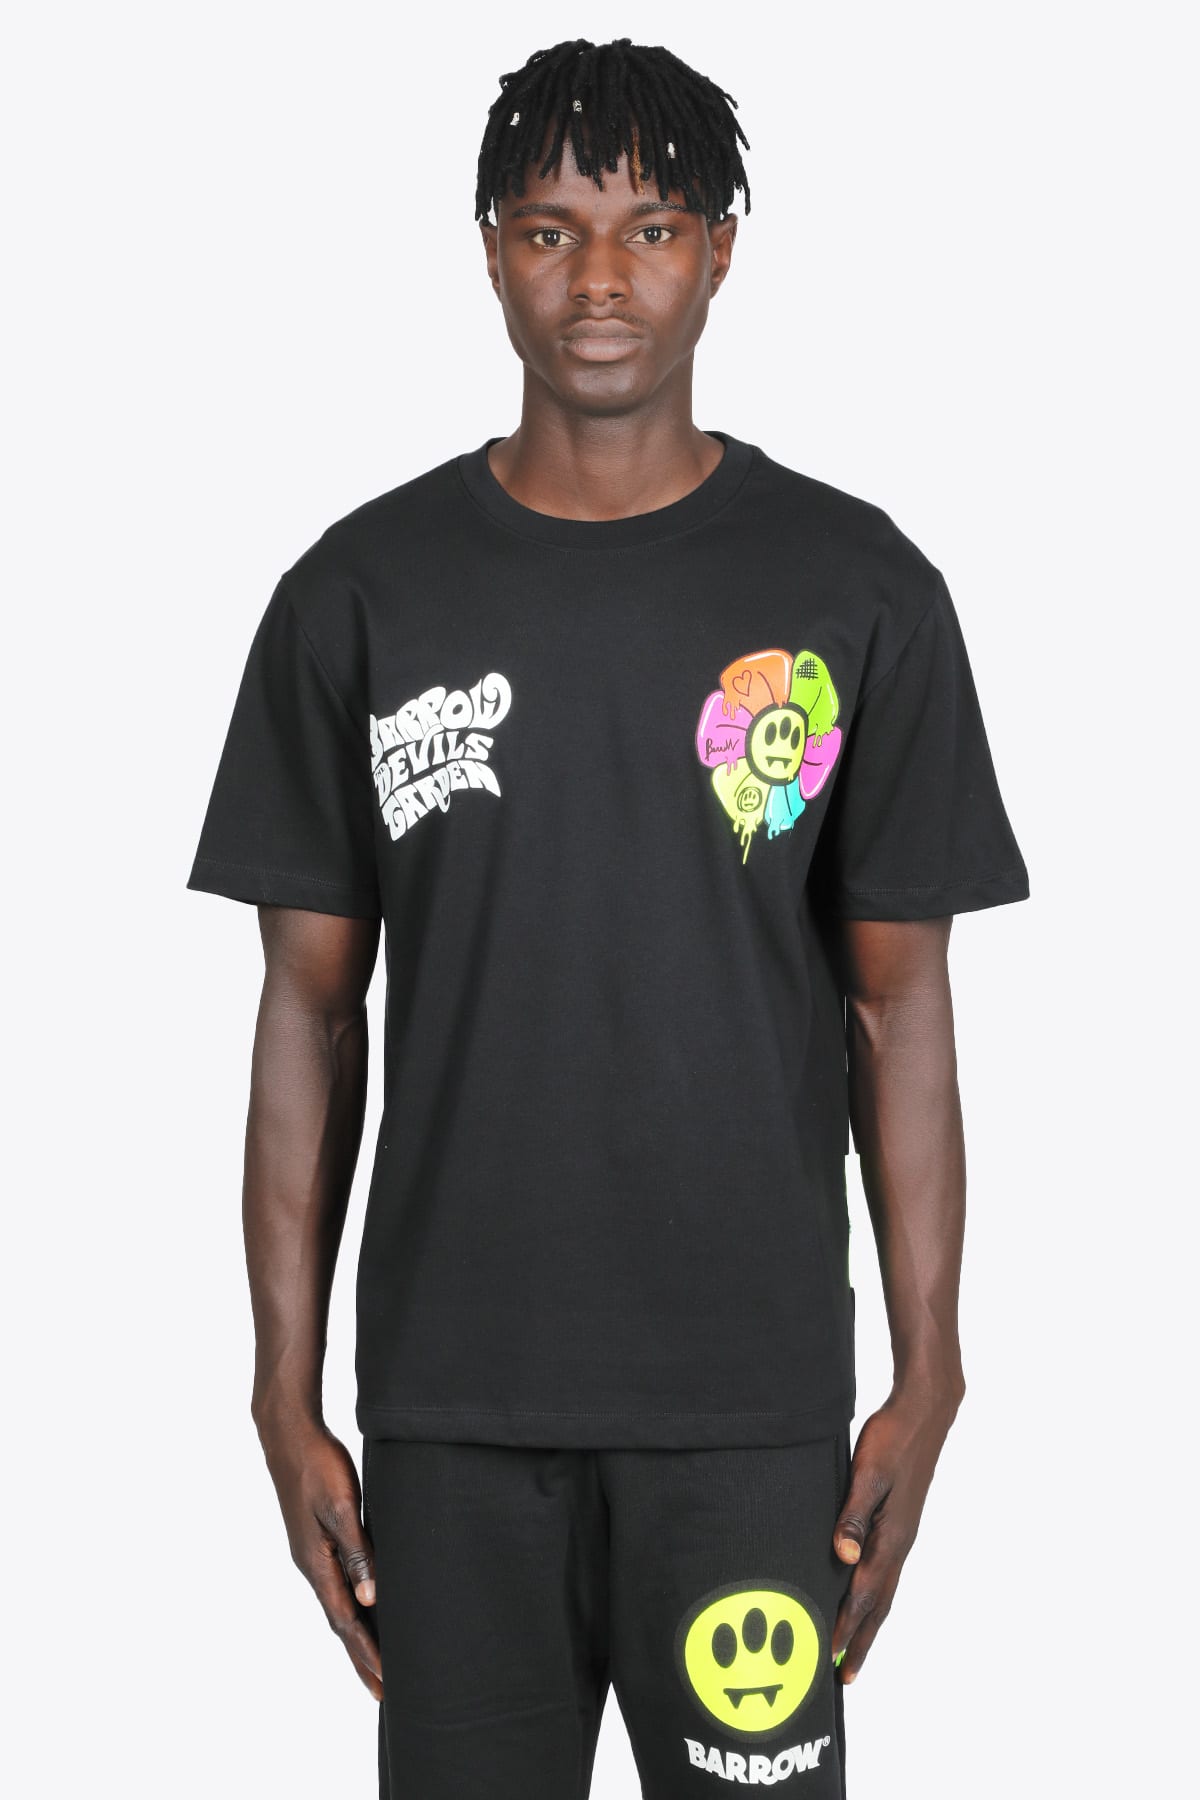 Barrow T-shirt Stampa Fiore Black cotton t-shirt with flower and slogan print